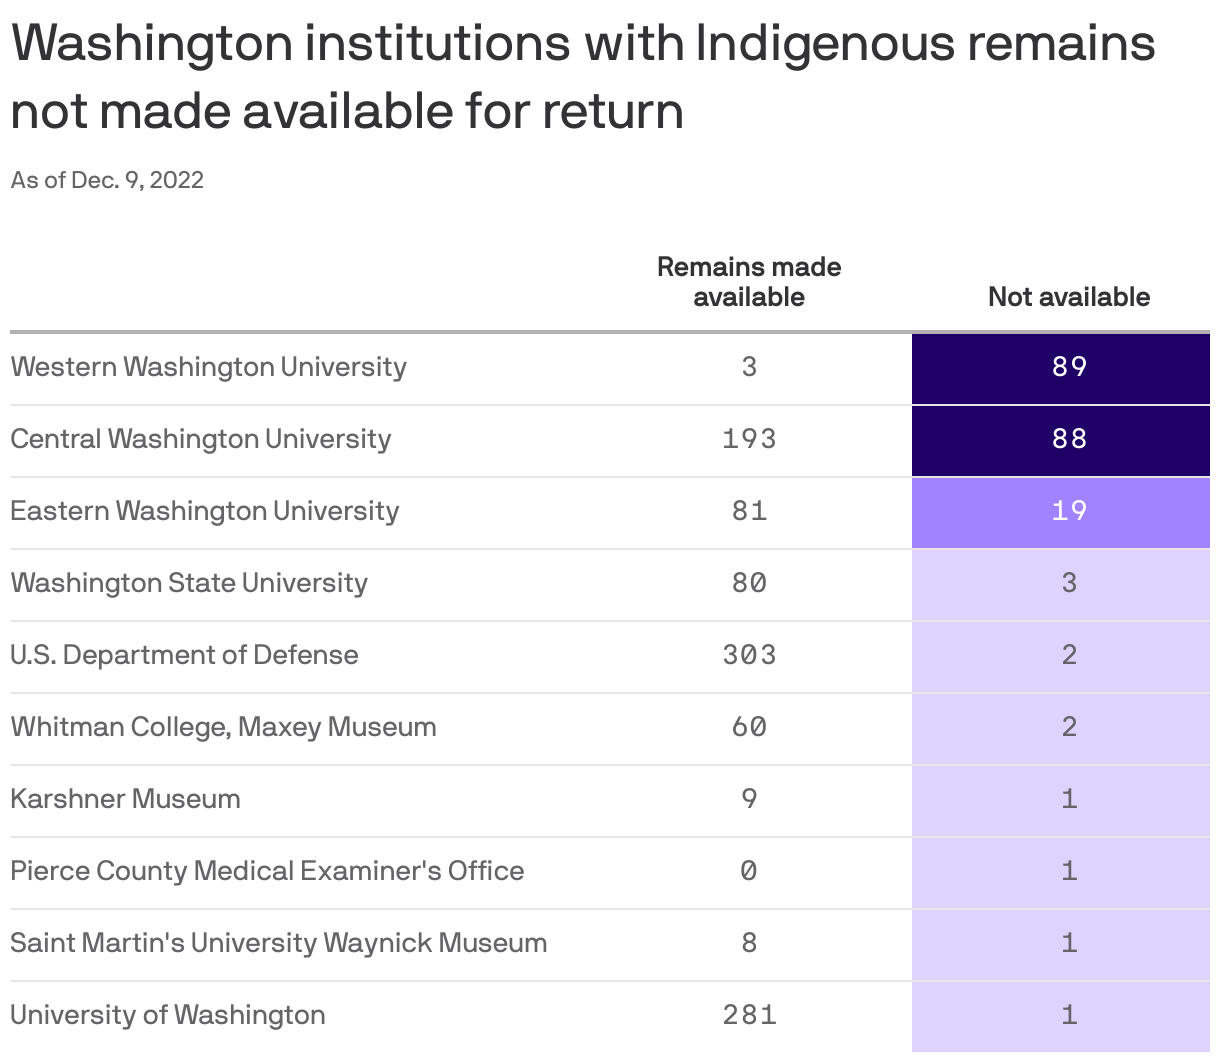 Washington institutions with Indigenous remains not made available for return